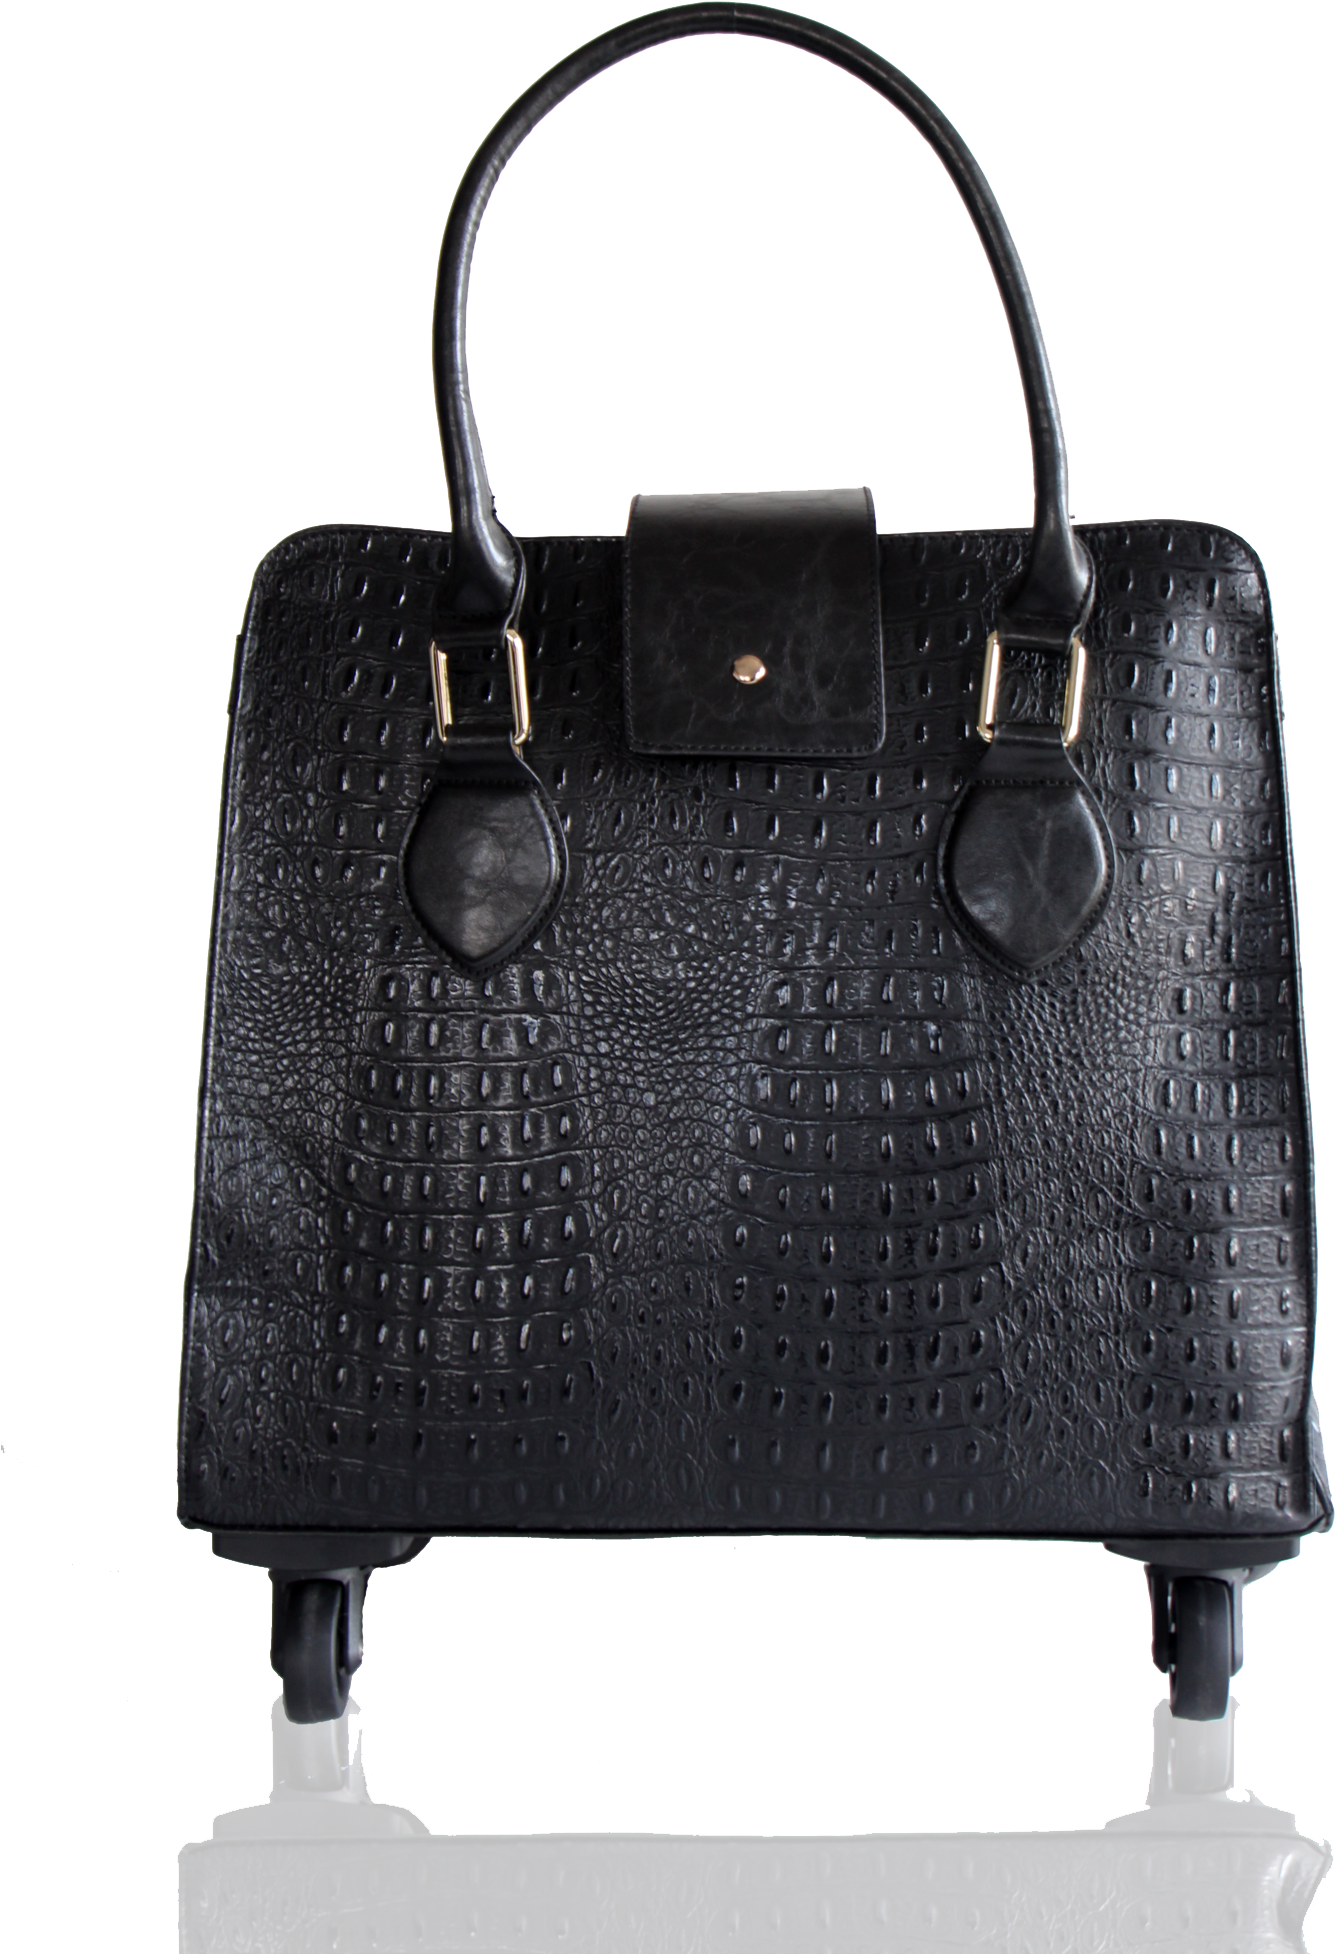 Black Textured Leather Purse Standing